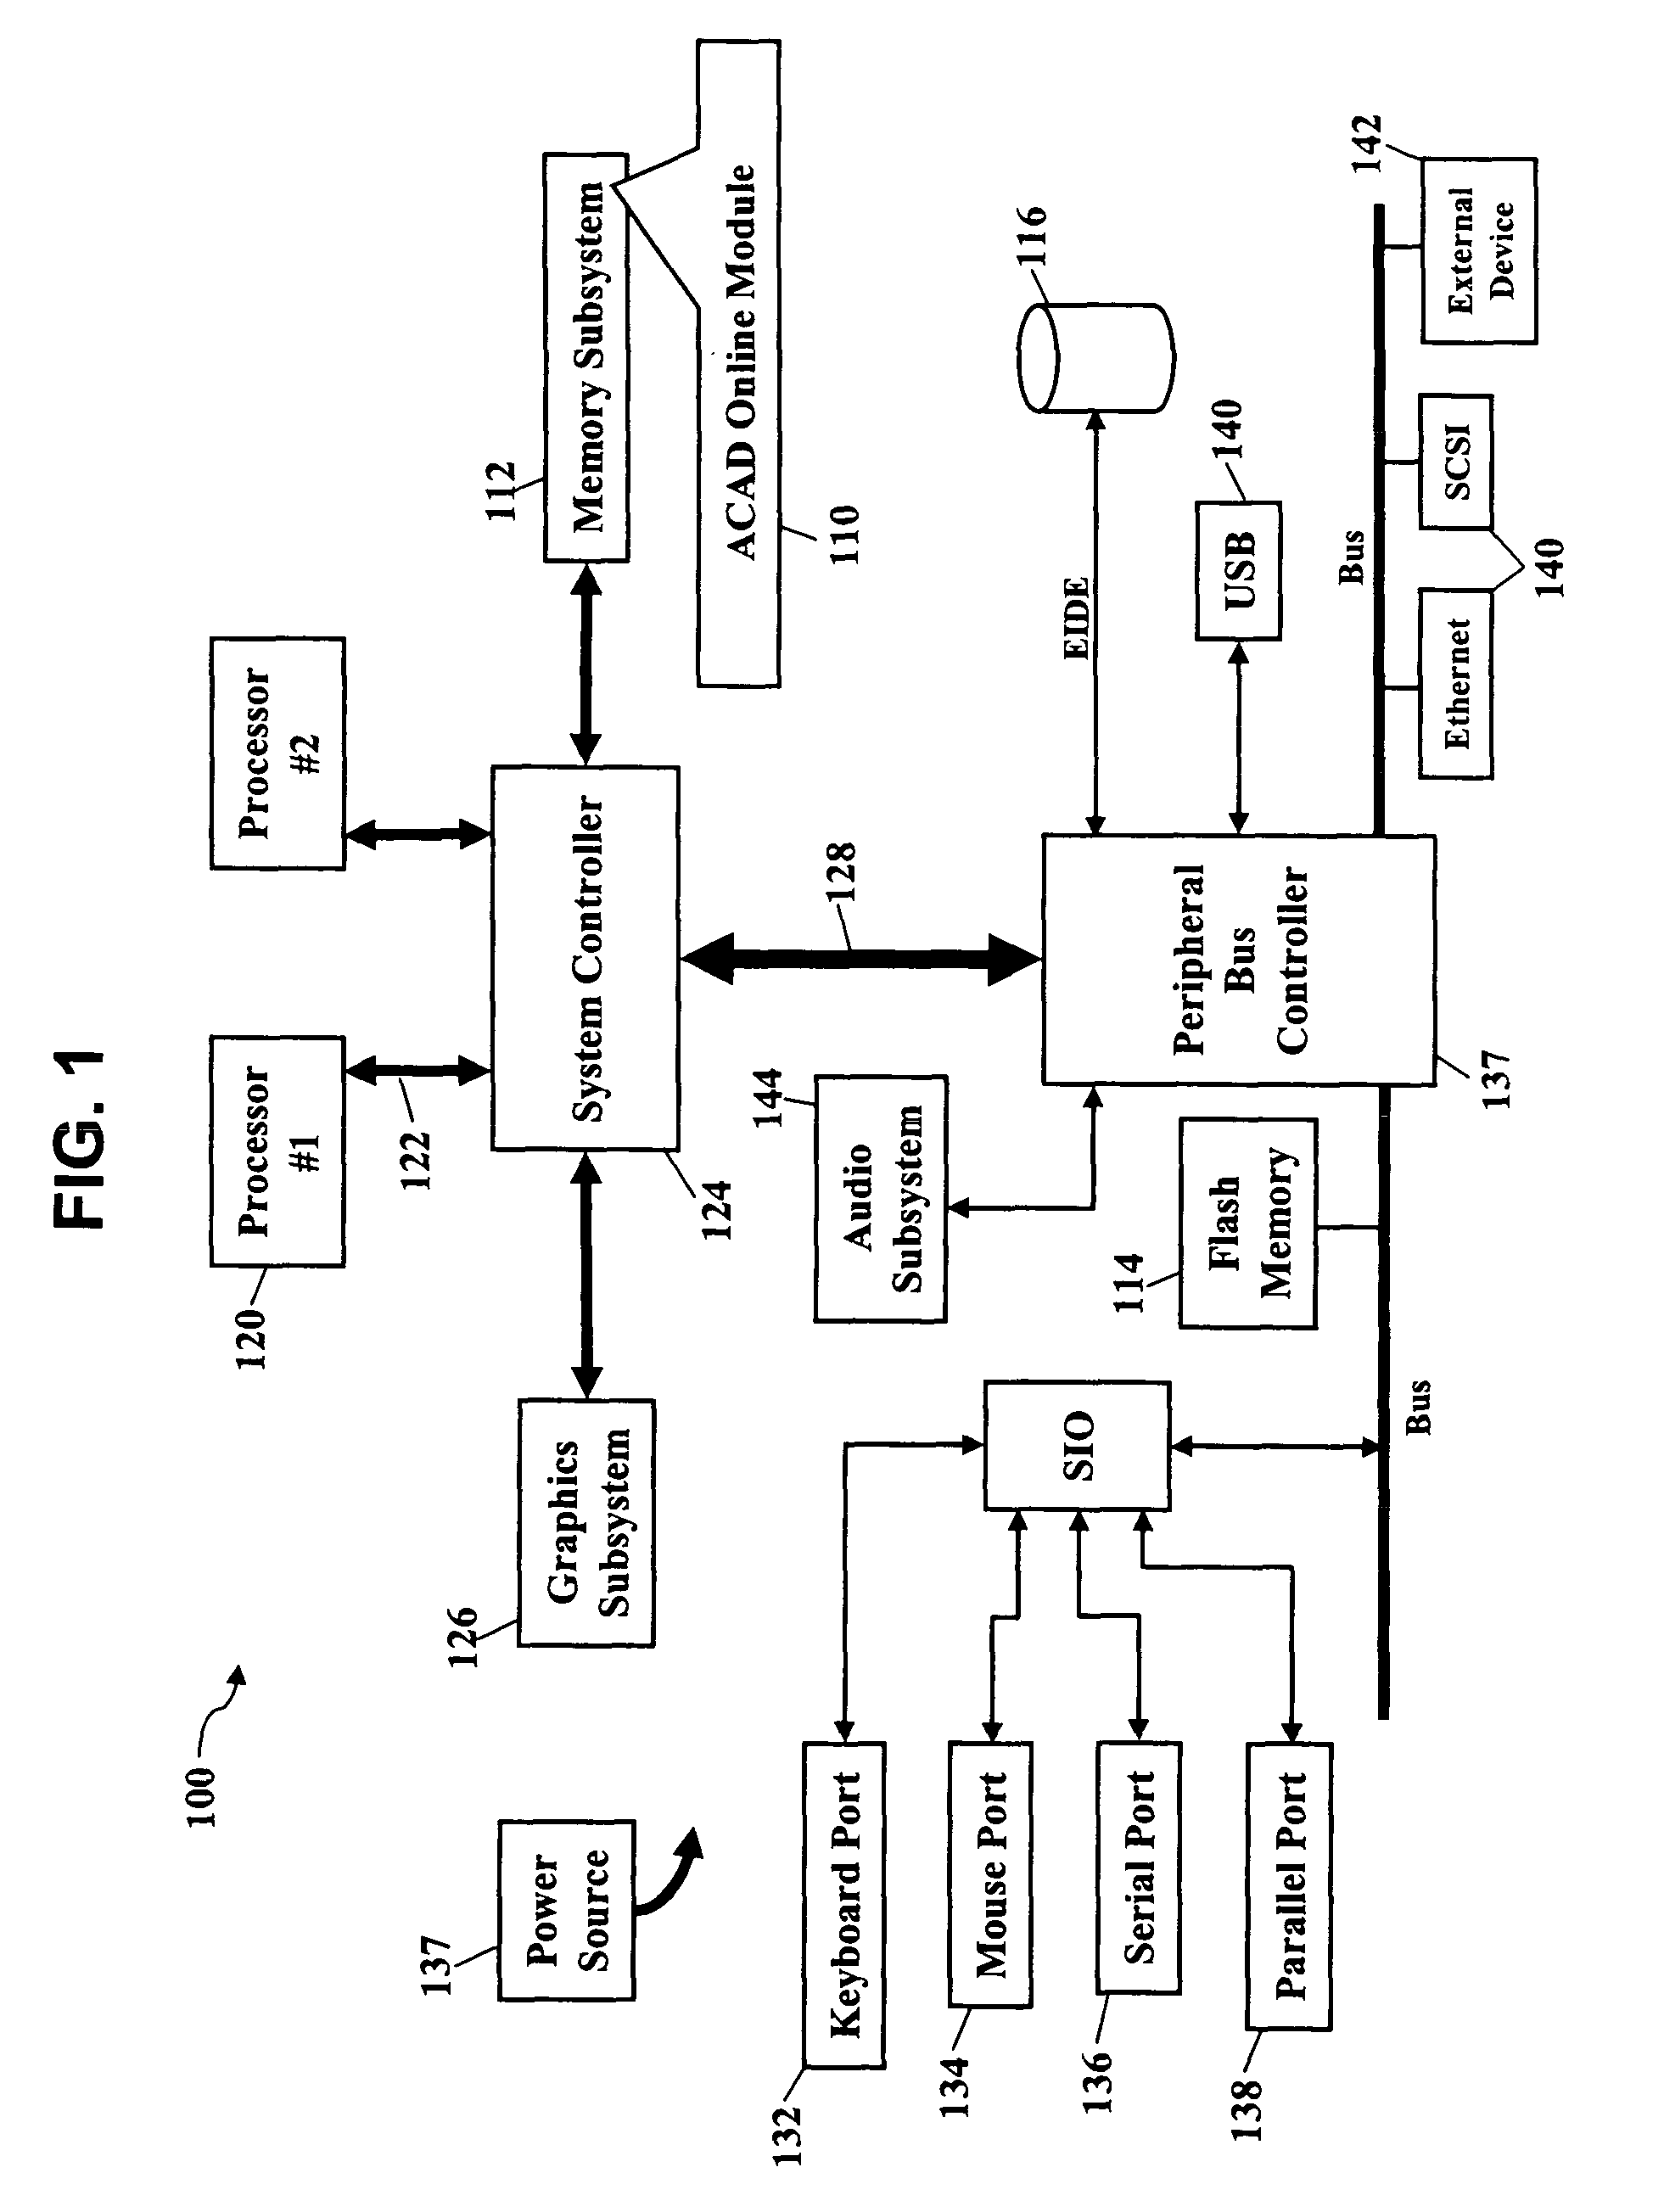 Systems and methods for management and analysis of telecommunication access service